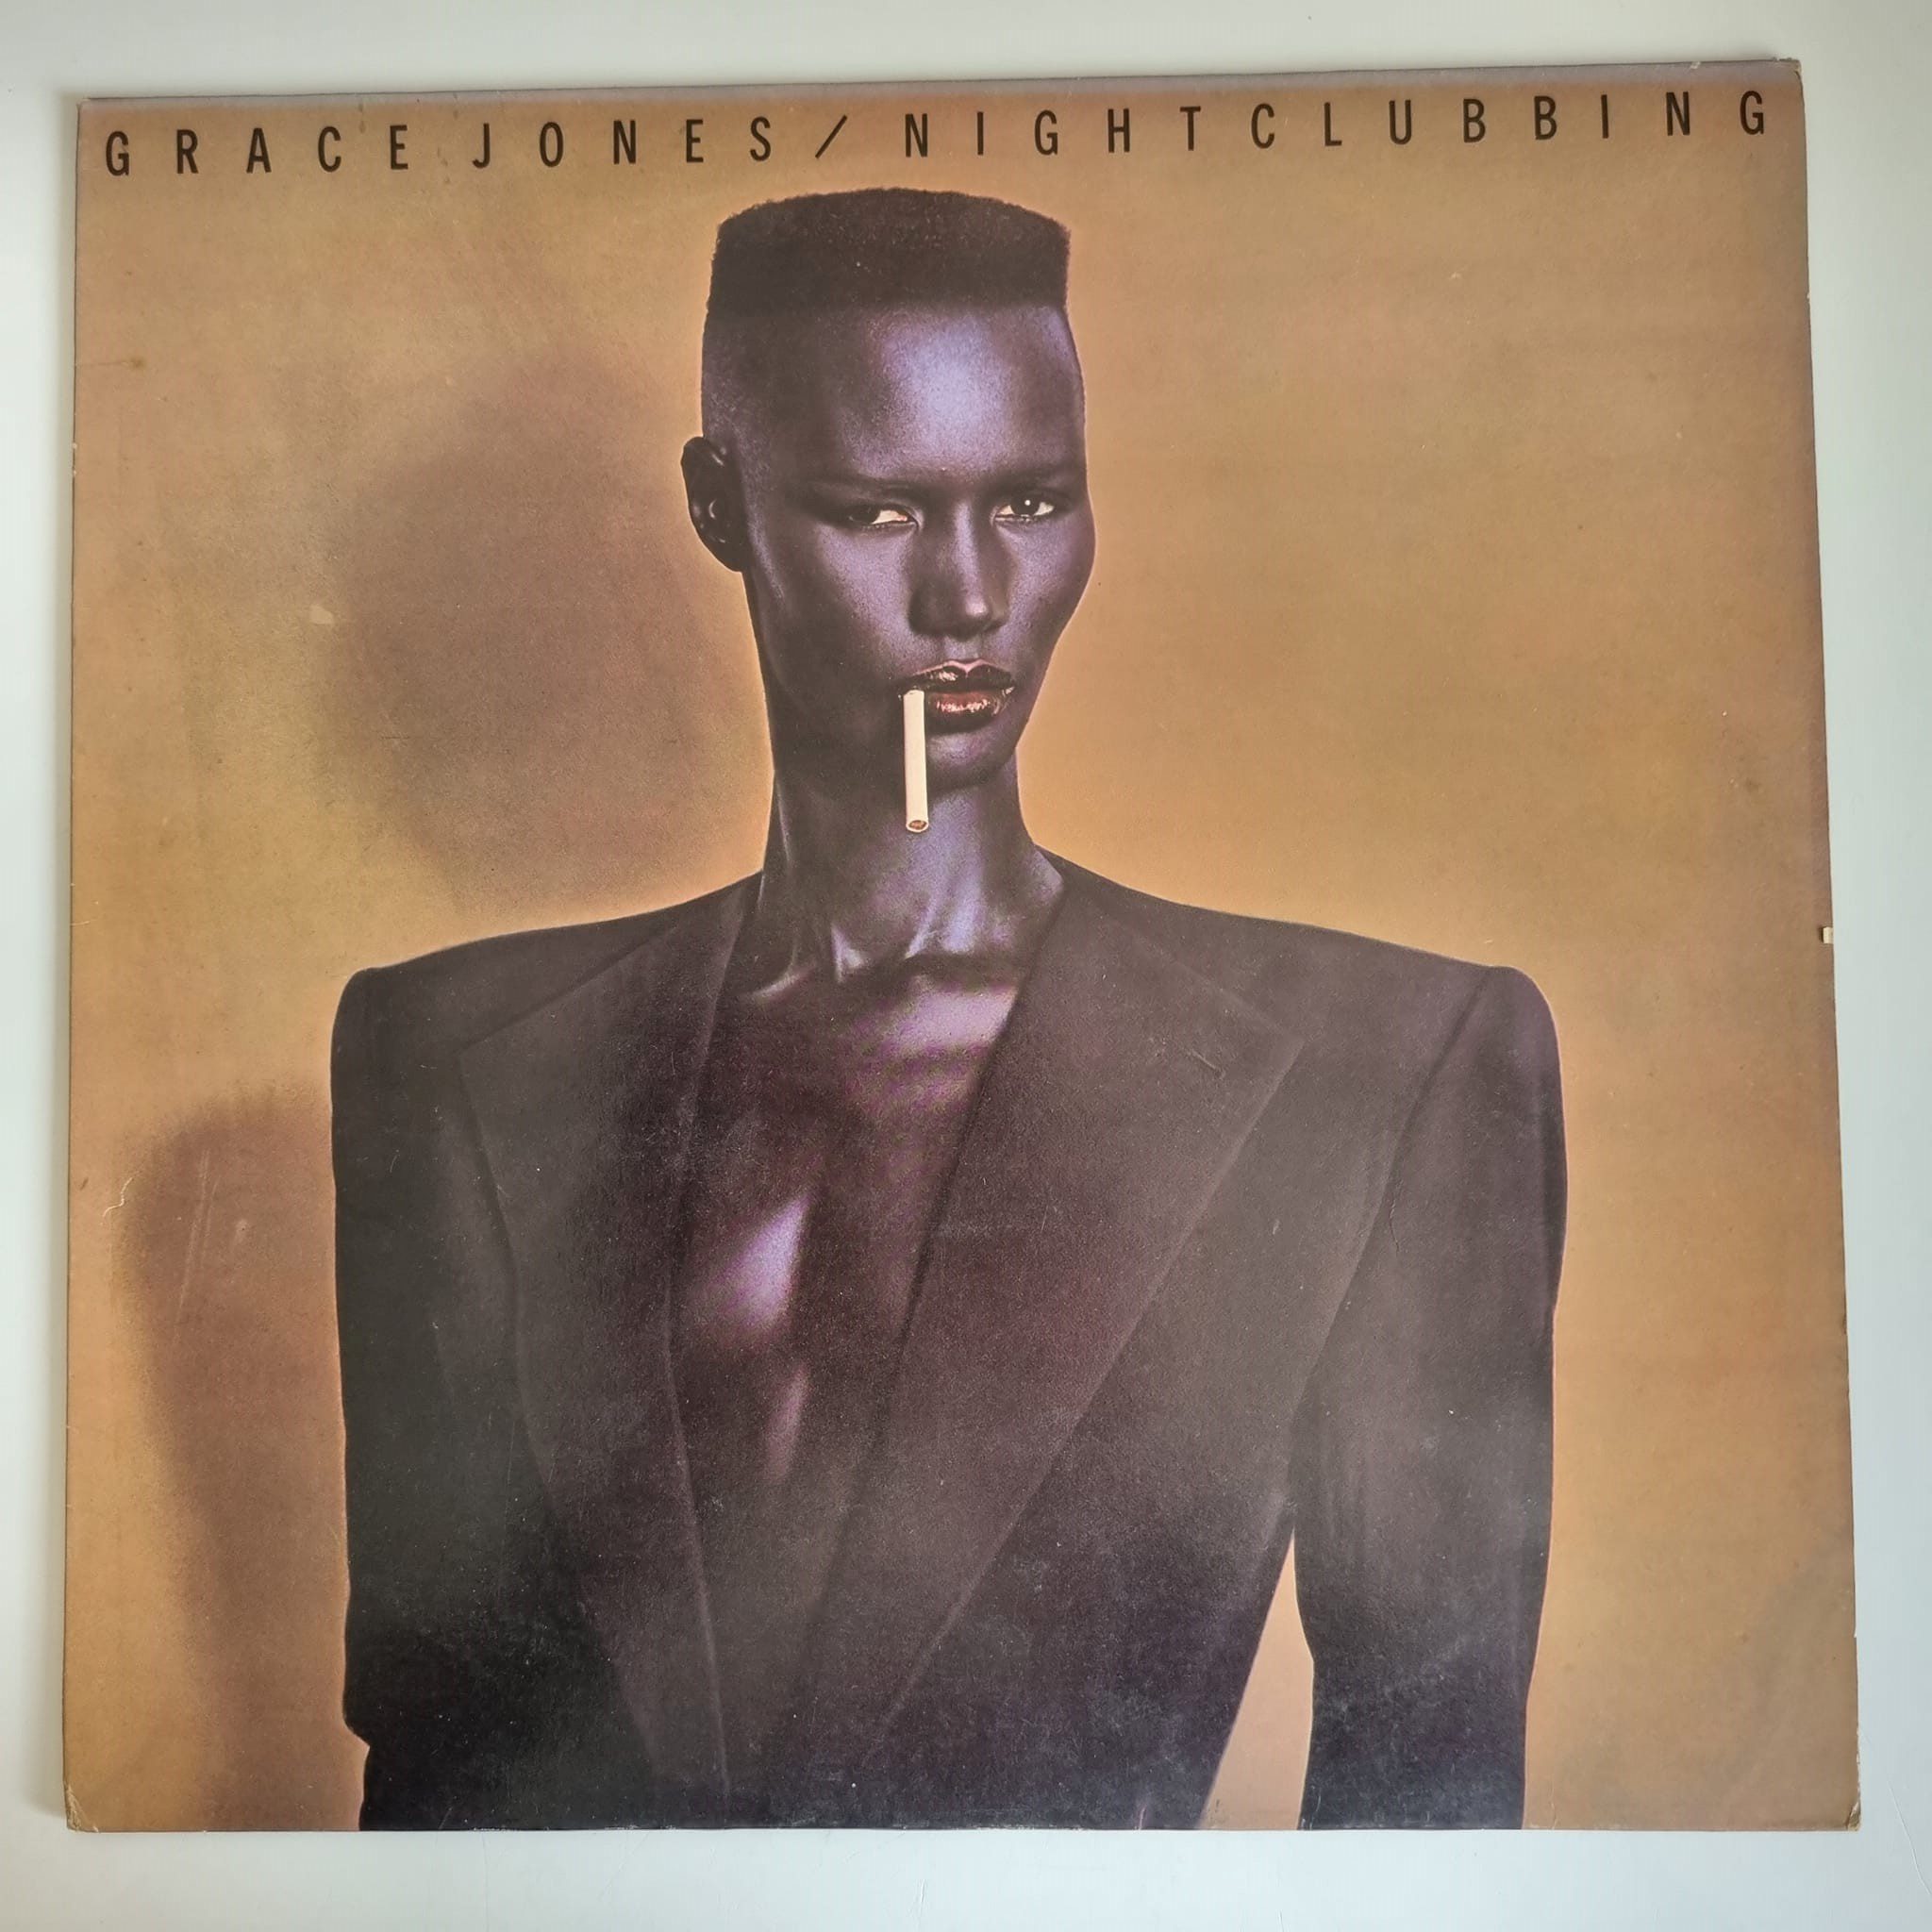 Buy this rare Grace Jones record by clicking here